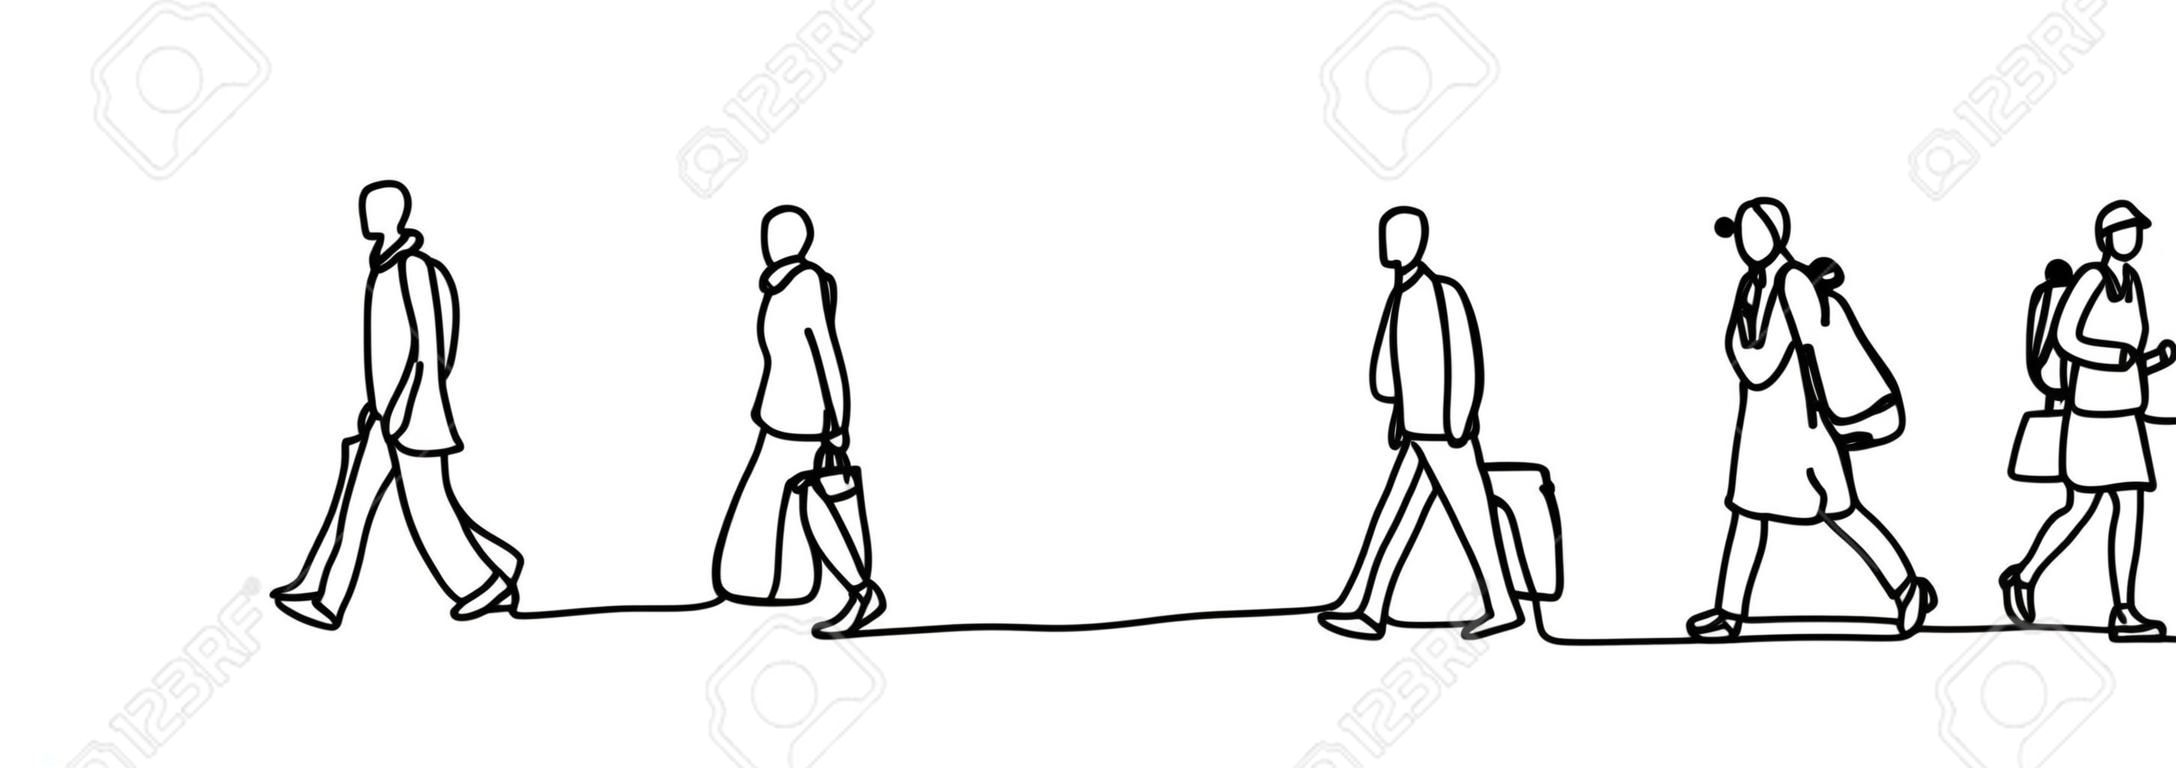 Urban commuters one continuous line drawing minimalism design sketch hand drawn vector illustration. People walking before or after work time.